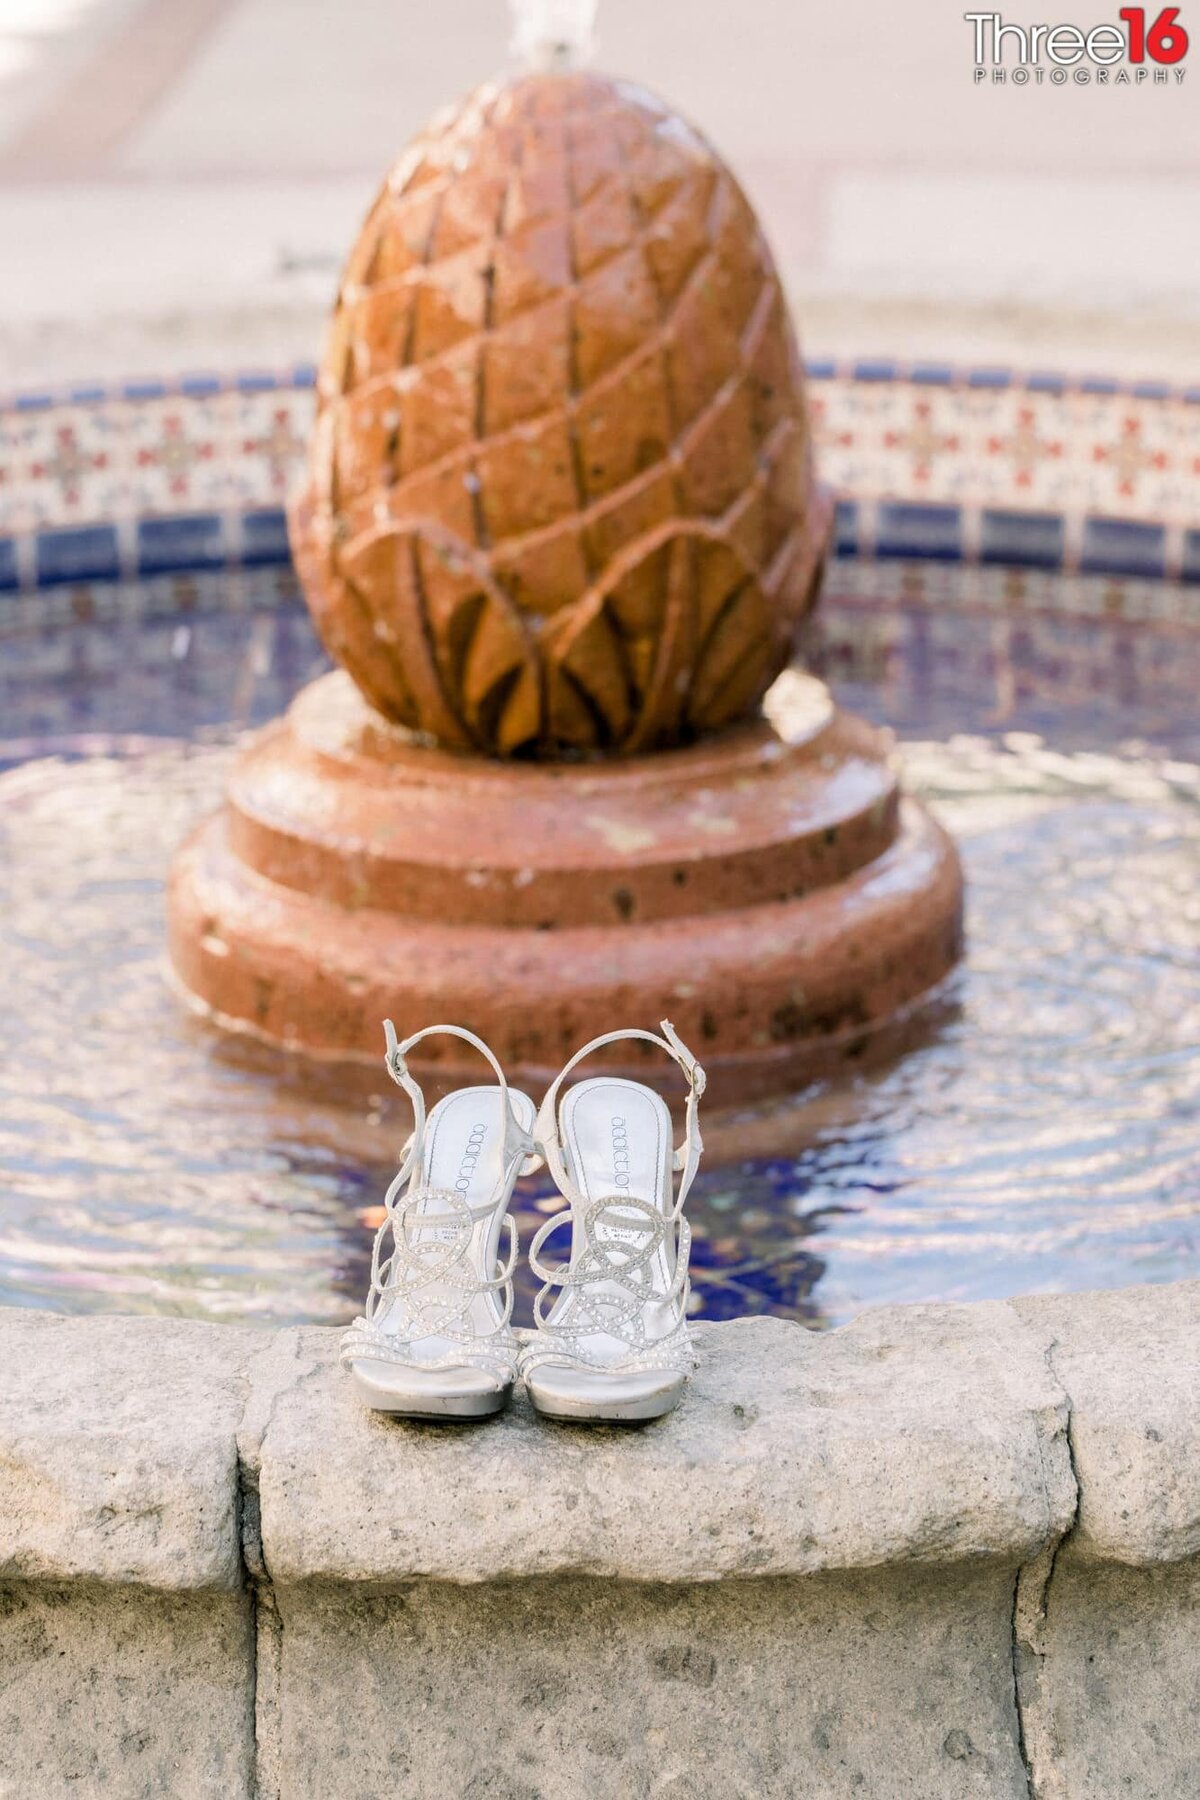 Bride's wedding shoes on the edge of the water fountain